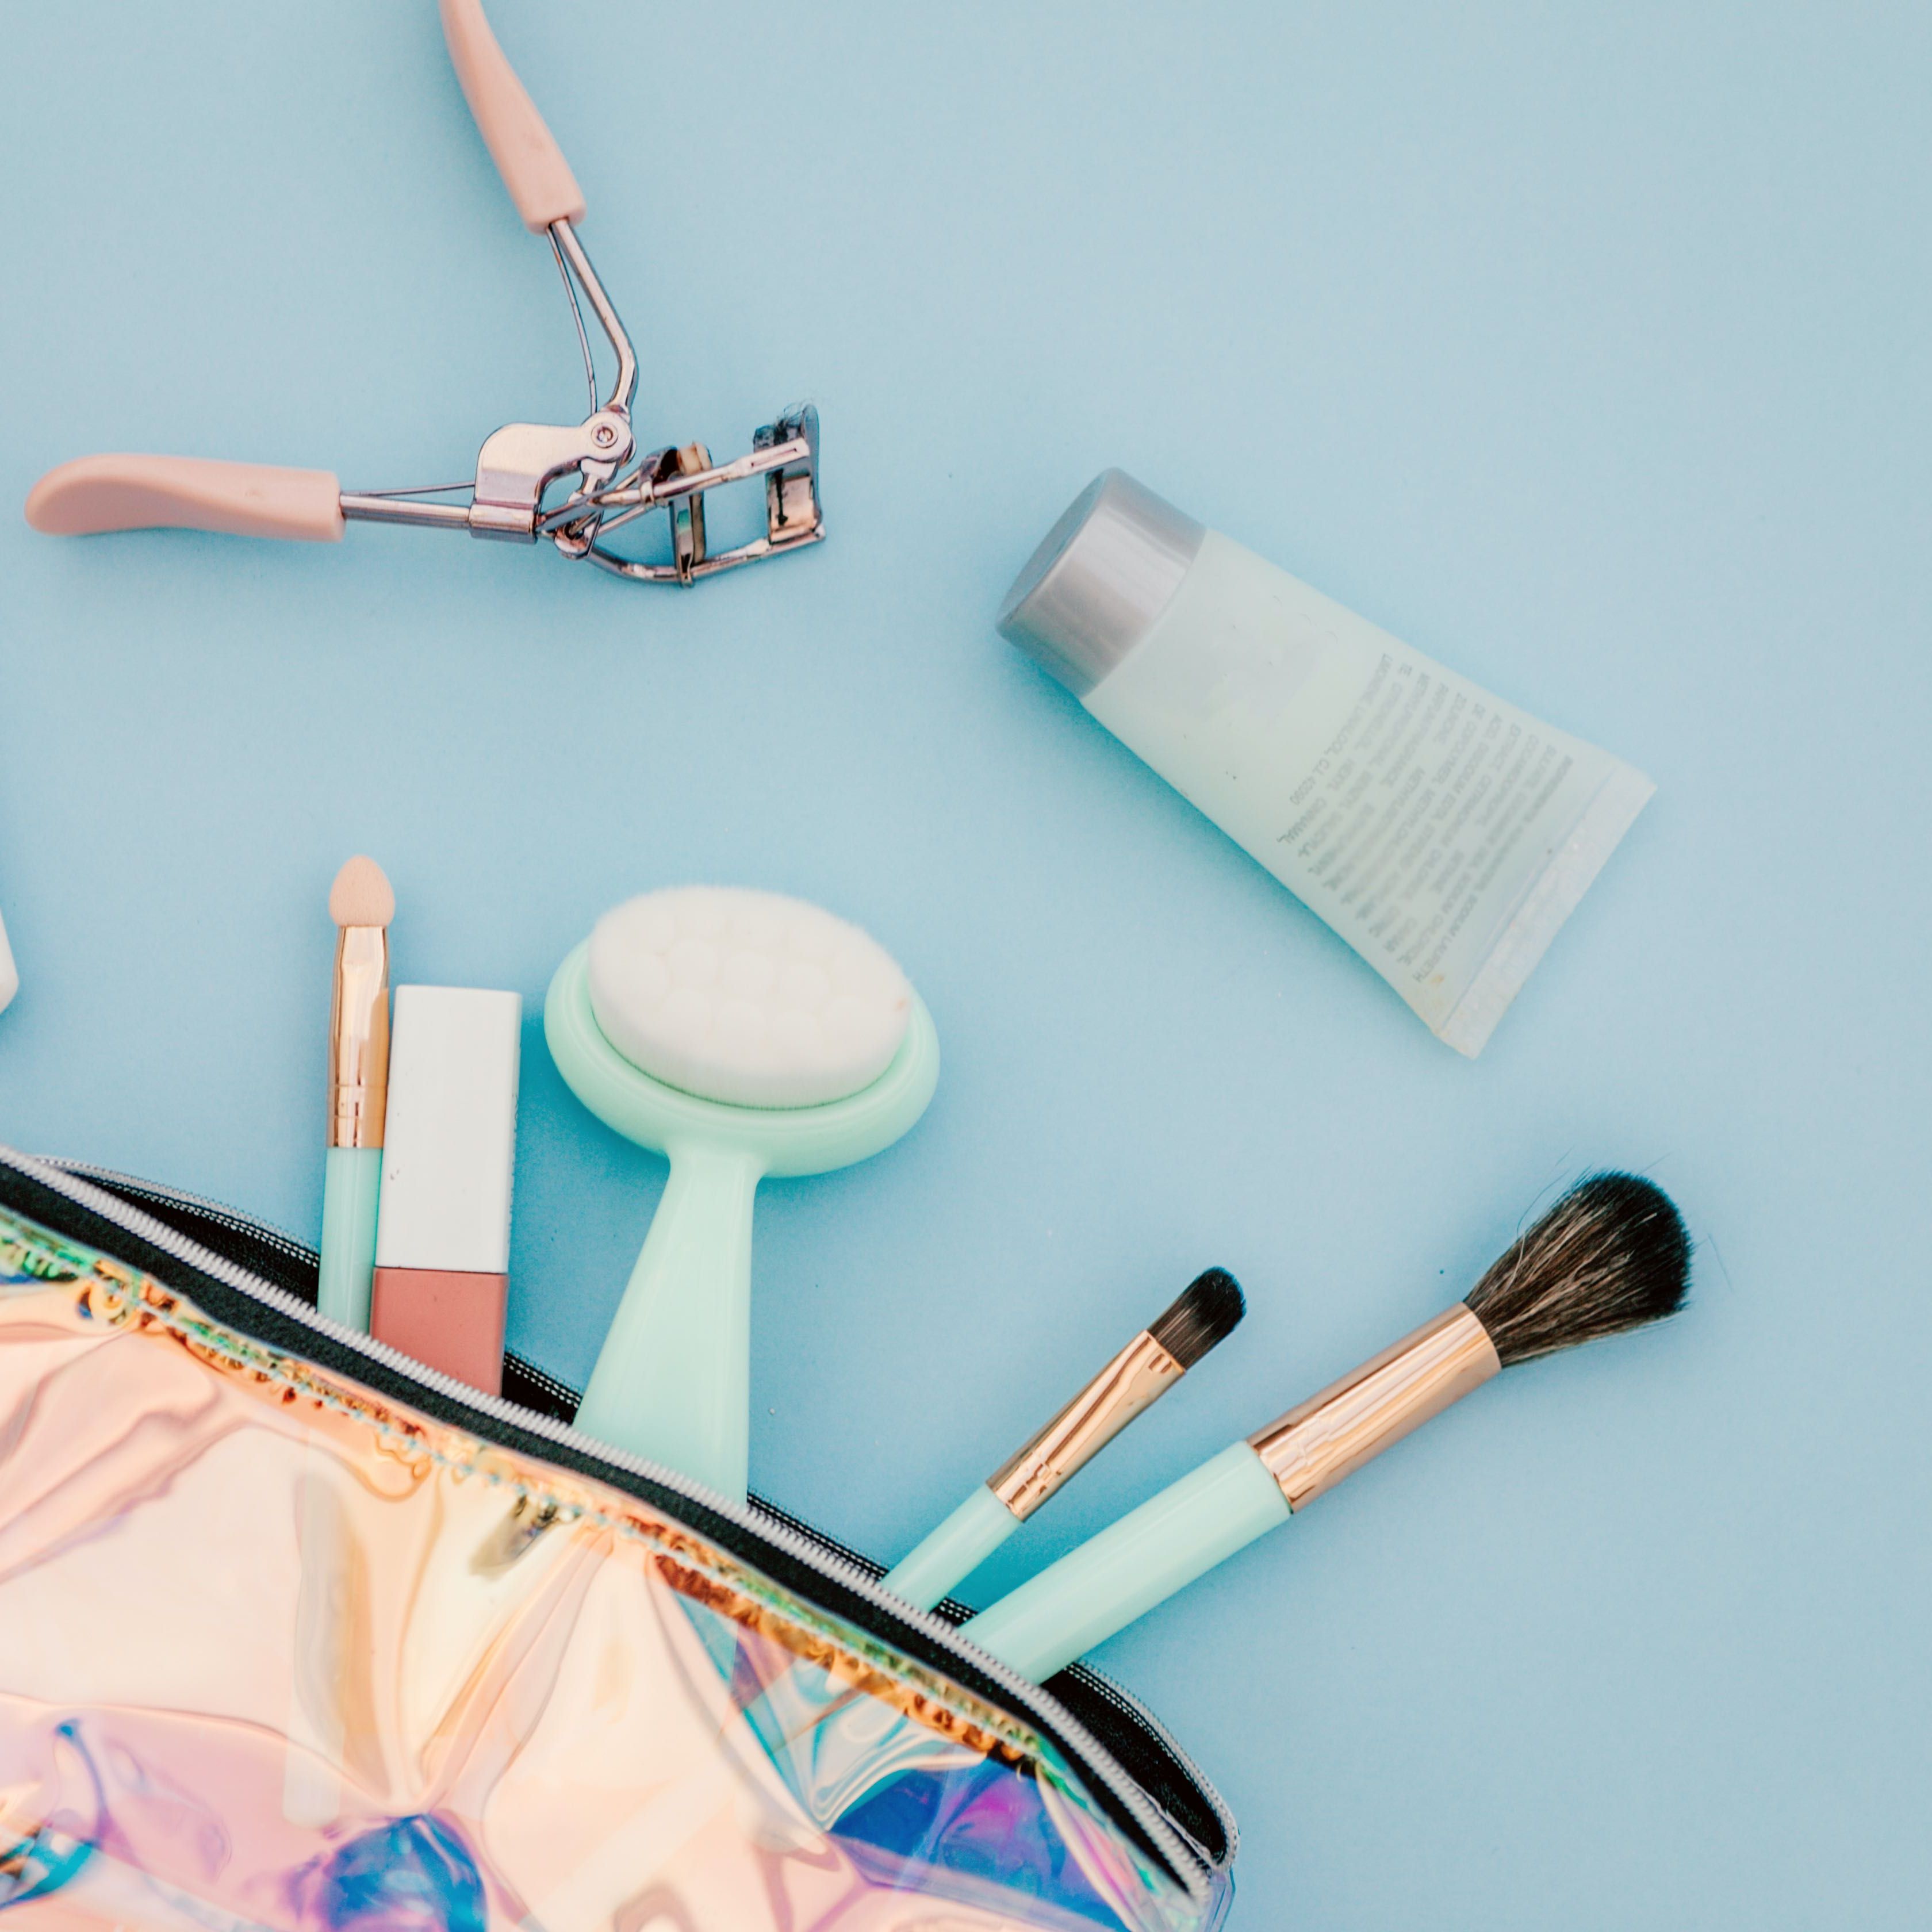 The Best Makeup Bag - 10 Makeup Bags That Will Make Your Life So